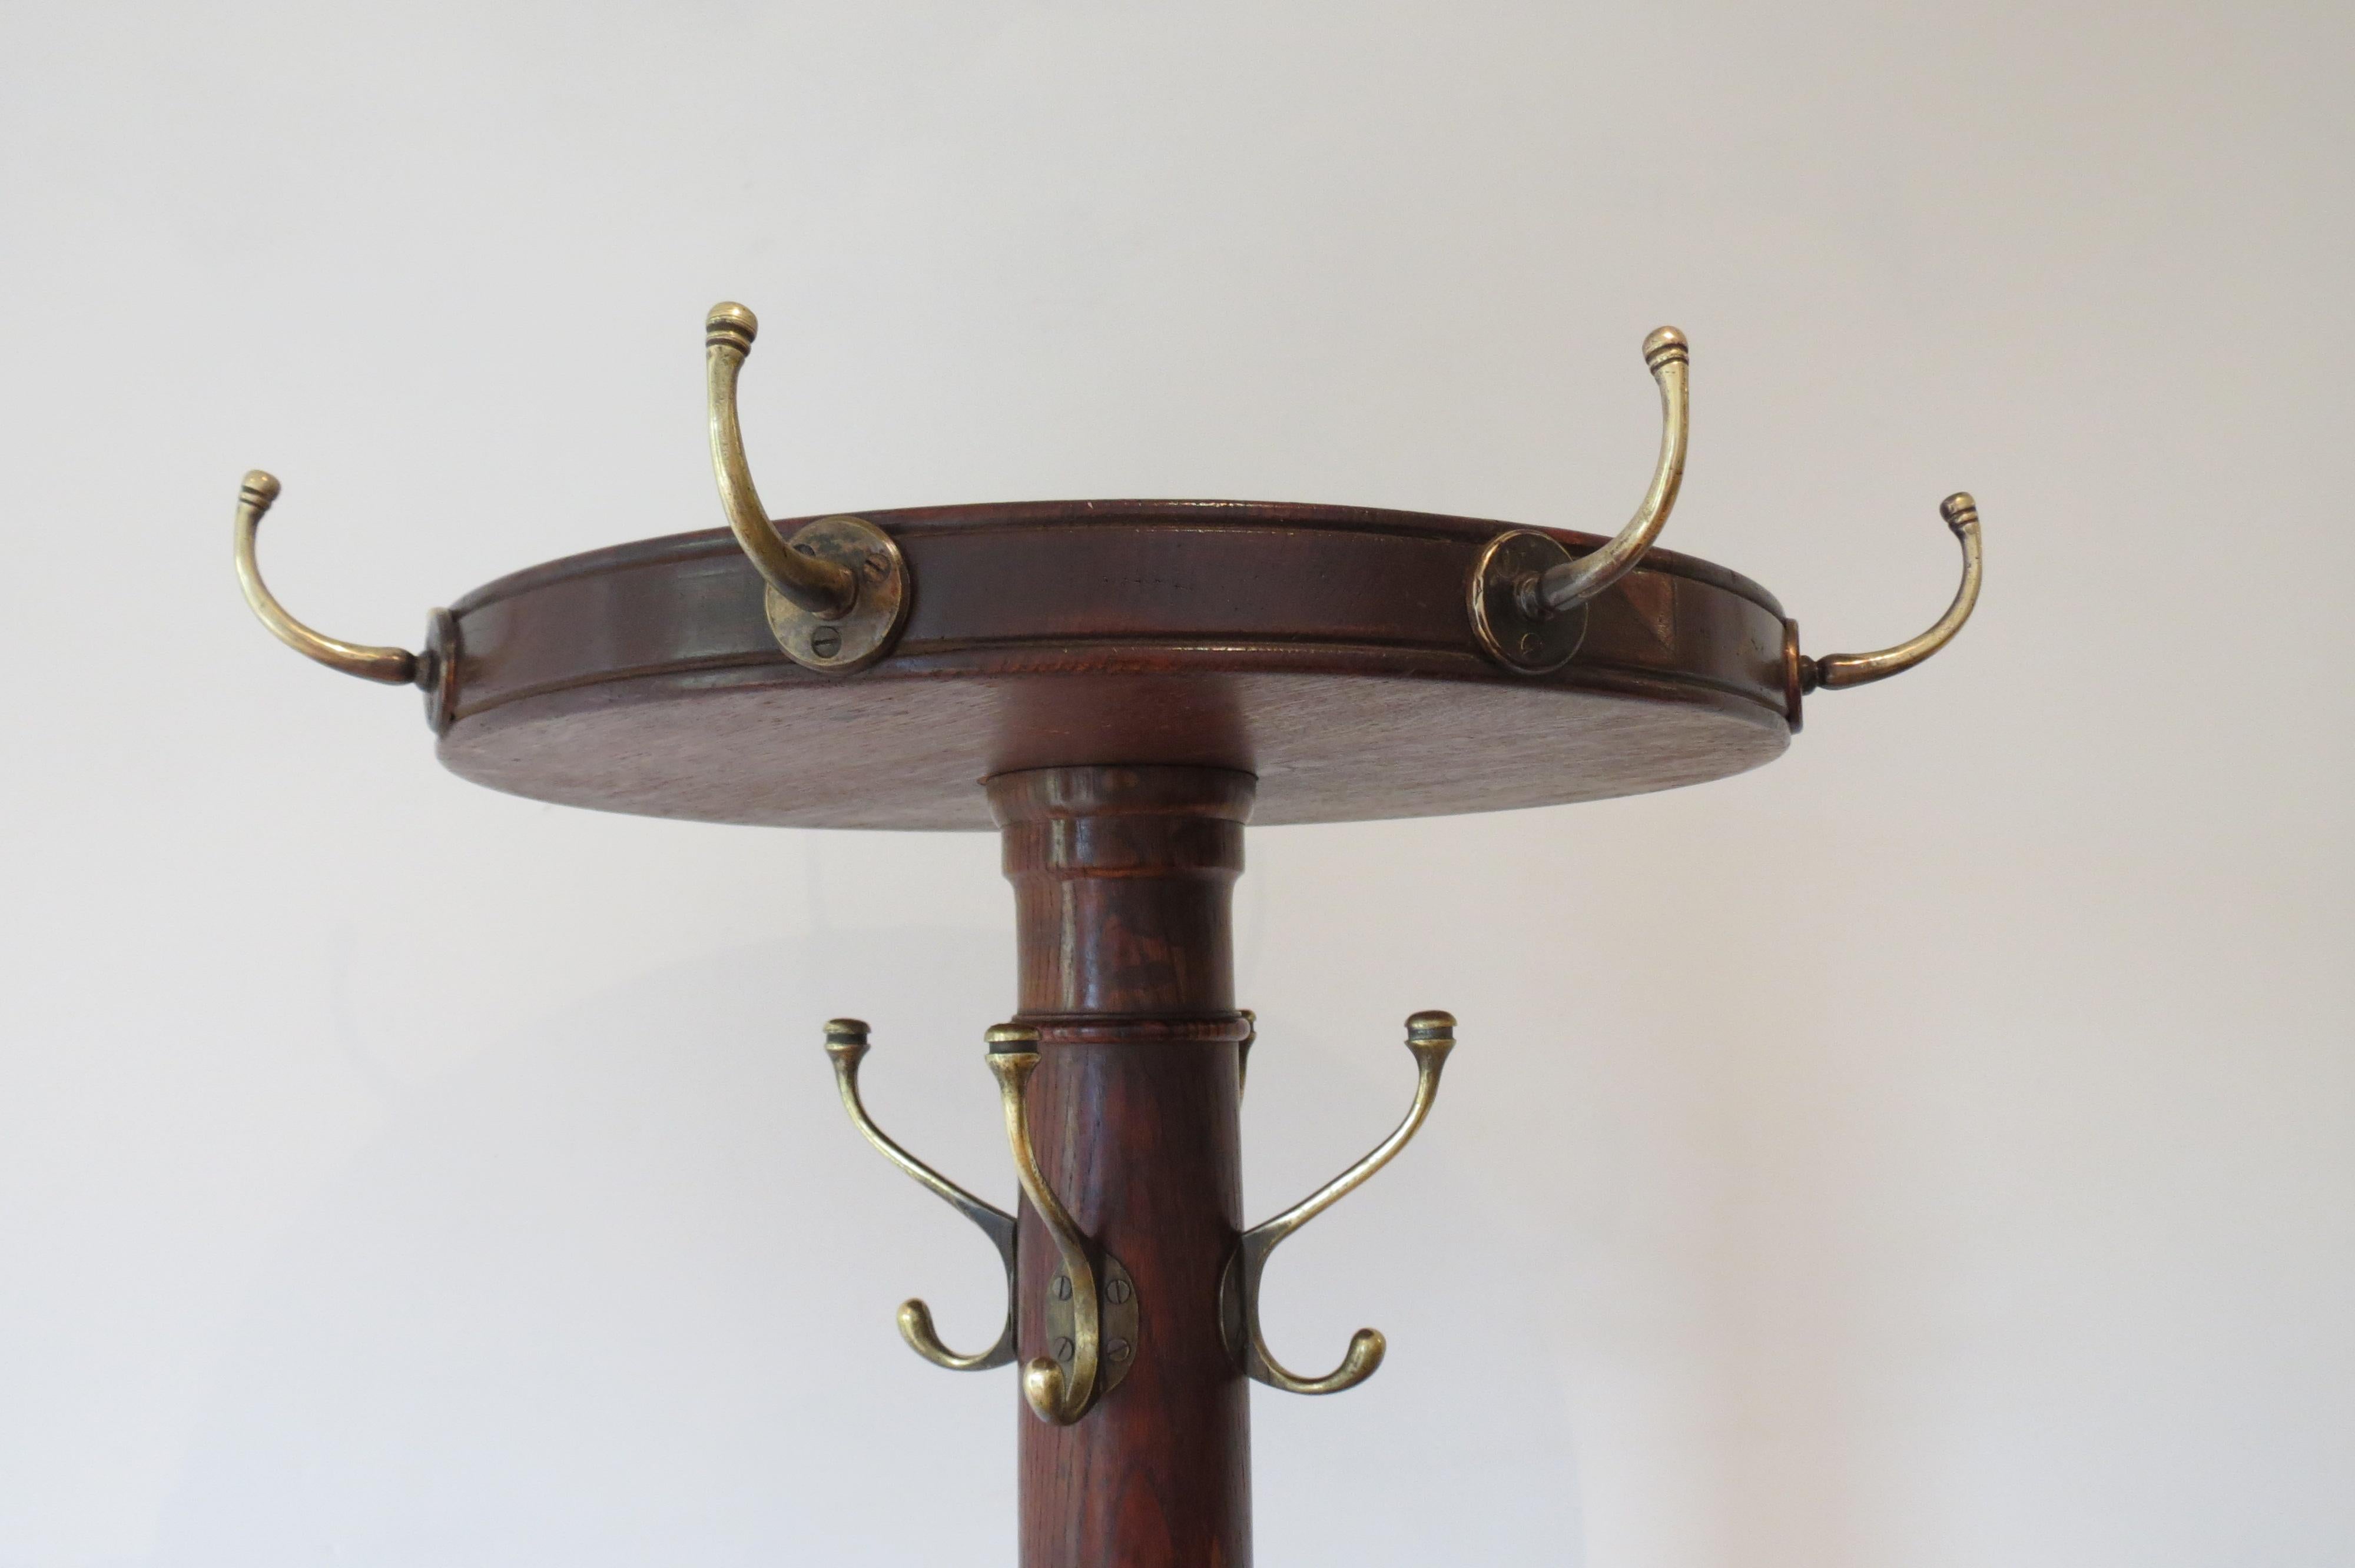 An antique freestanding coat rack, exceptional quality. Made from Oak and solid brass fittings. The top section with hooks swivels allowing easy access to hanging coats. The large solid brass ring allows umbrellas and sticks to be stored